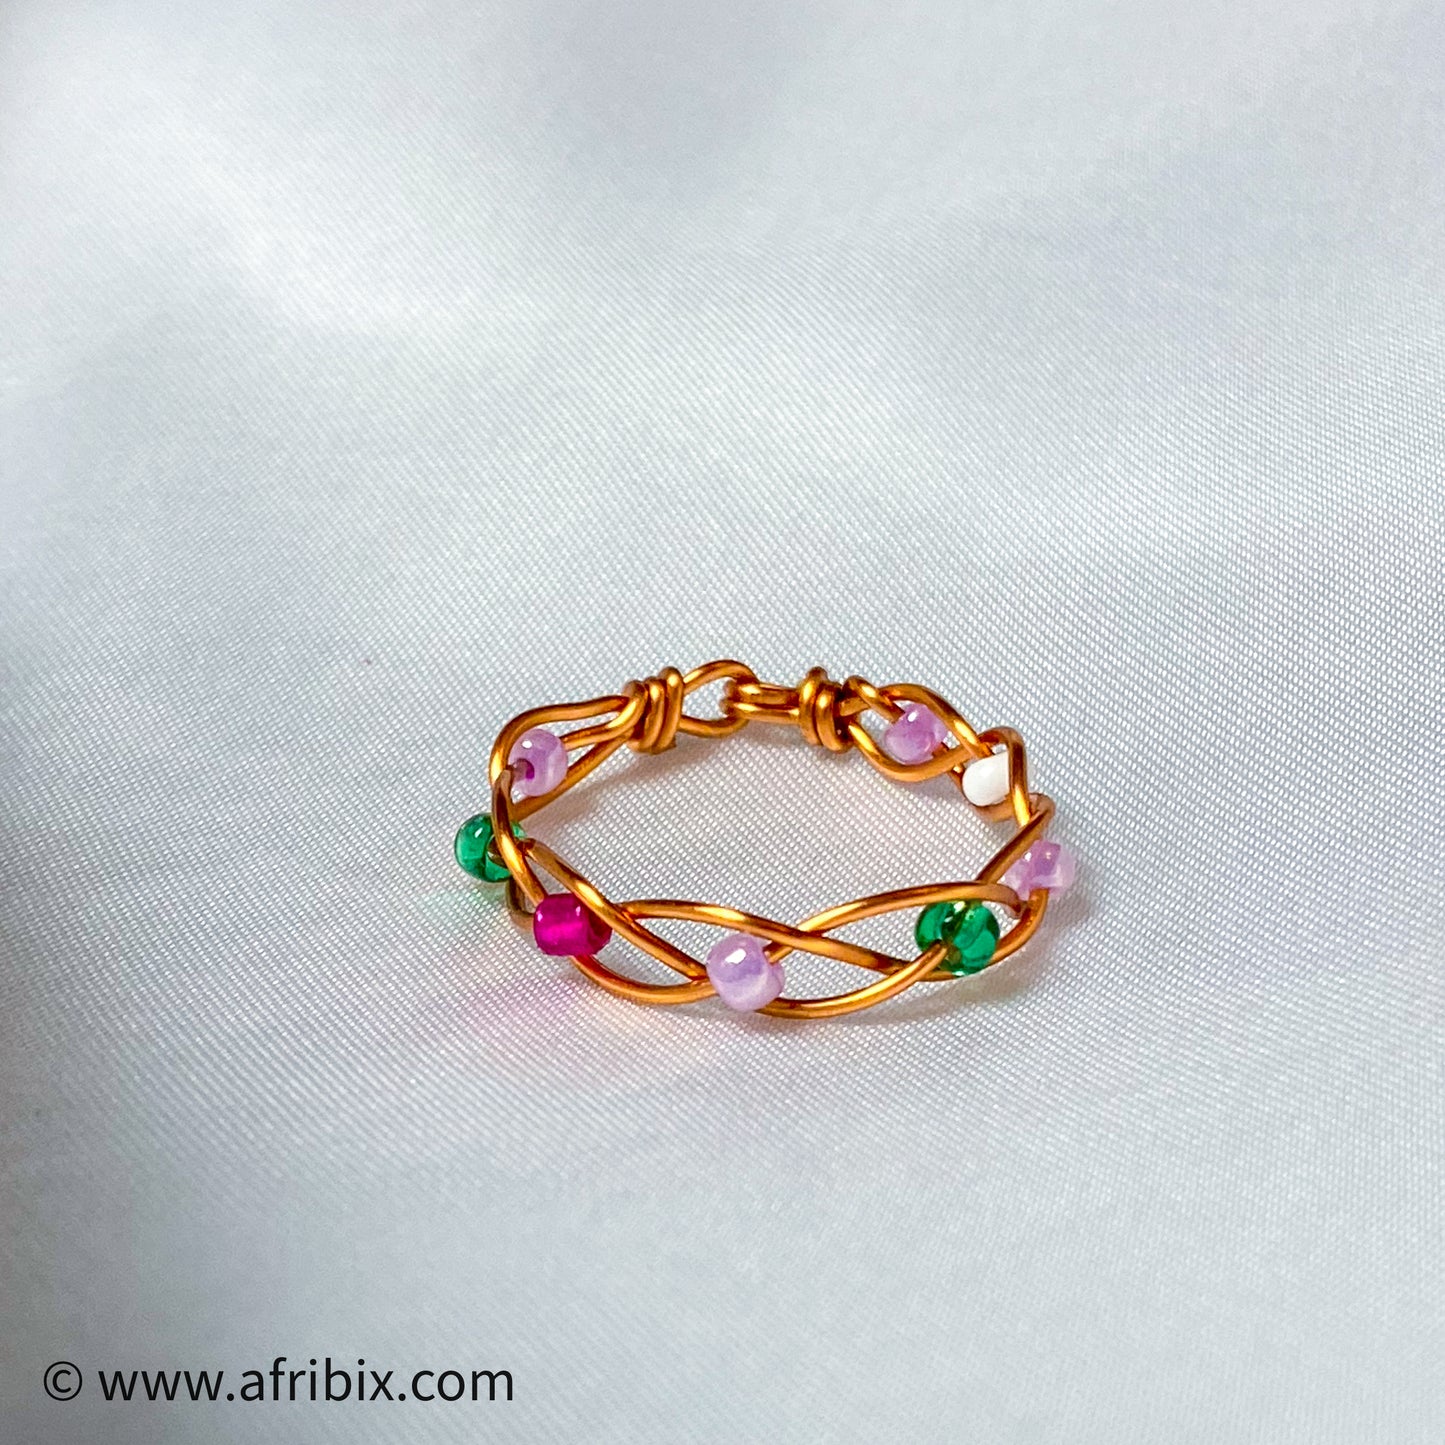 Braided Woven Ring - Serenity